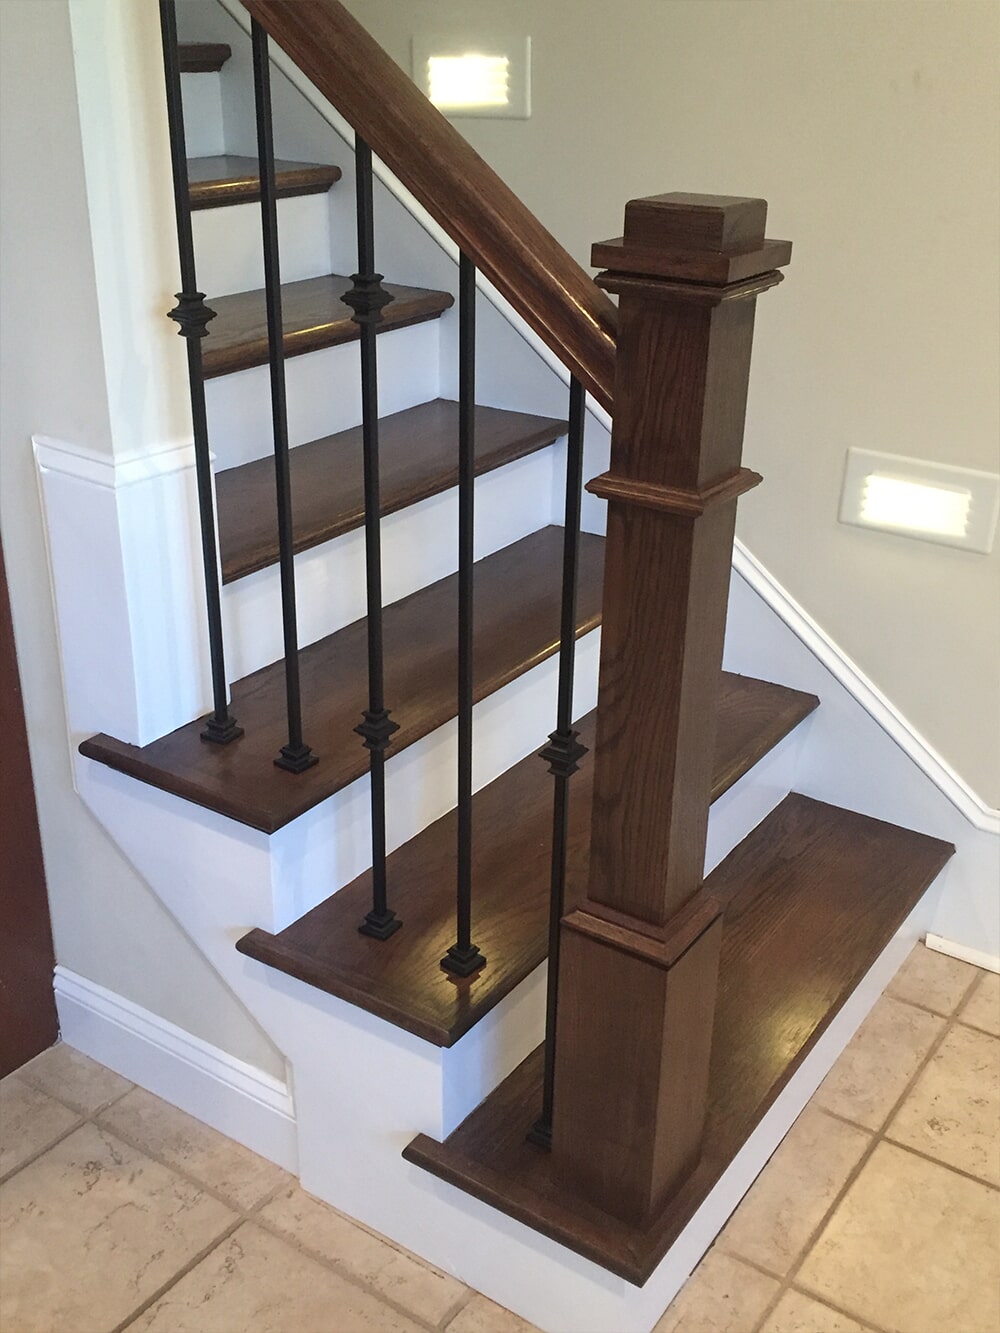 Stair Systems in Hickory, Lenoir, & Morganton NC from Munday Hardwoods, Inc